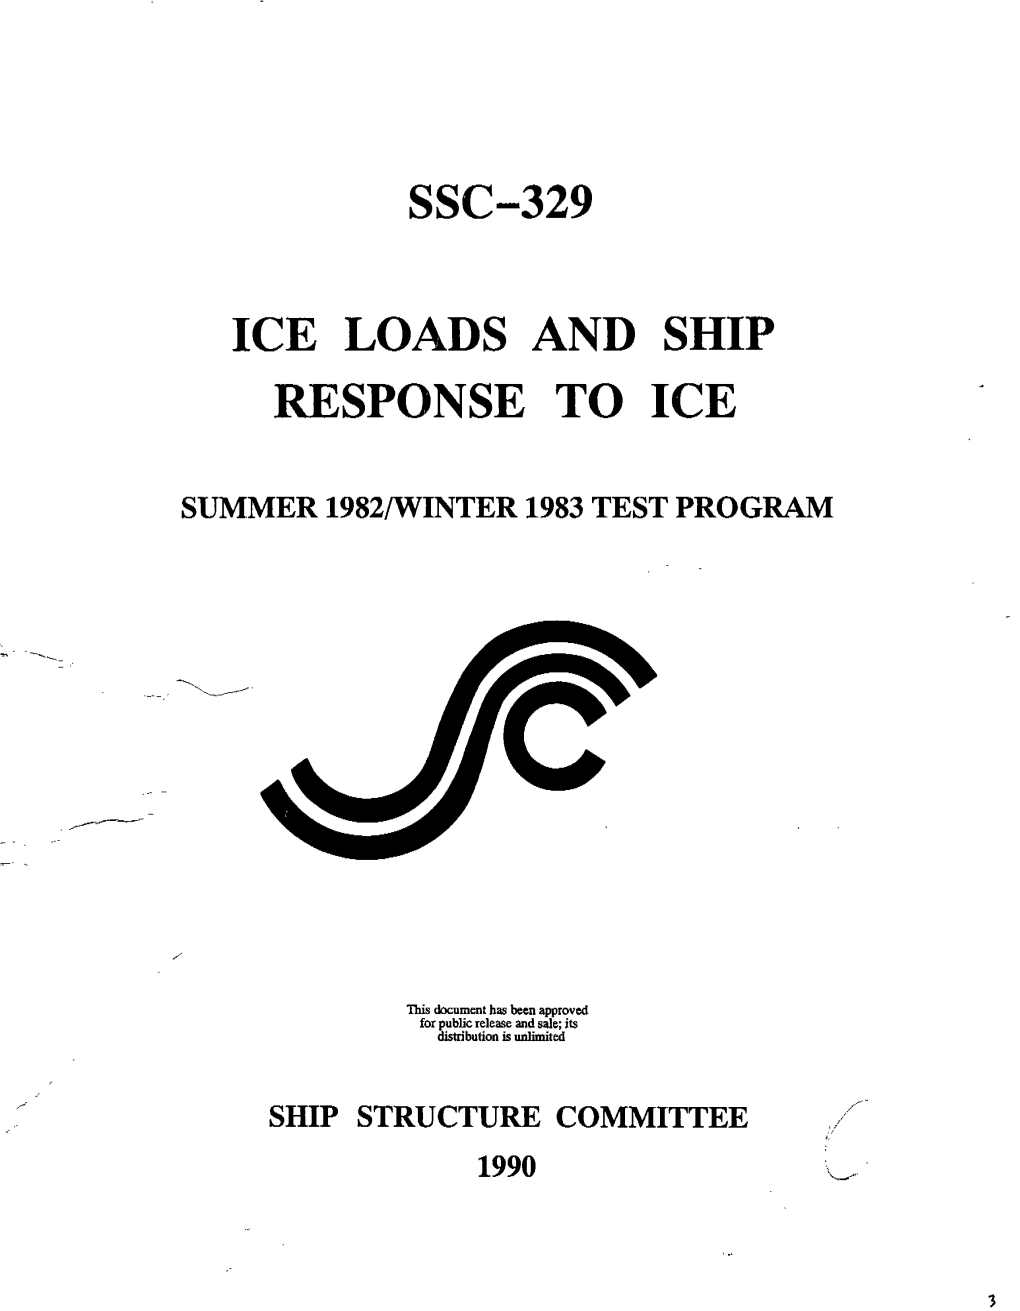 SSC-329 Ice Loads and Ship Response to Ice by J.W